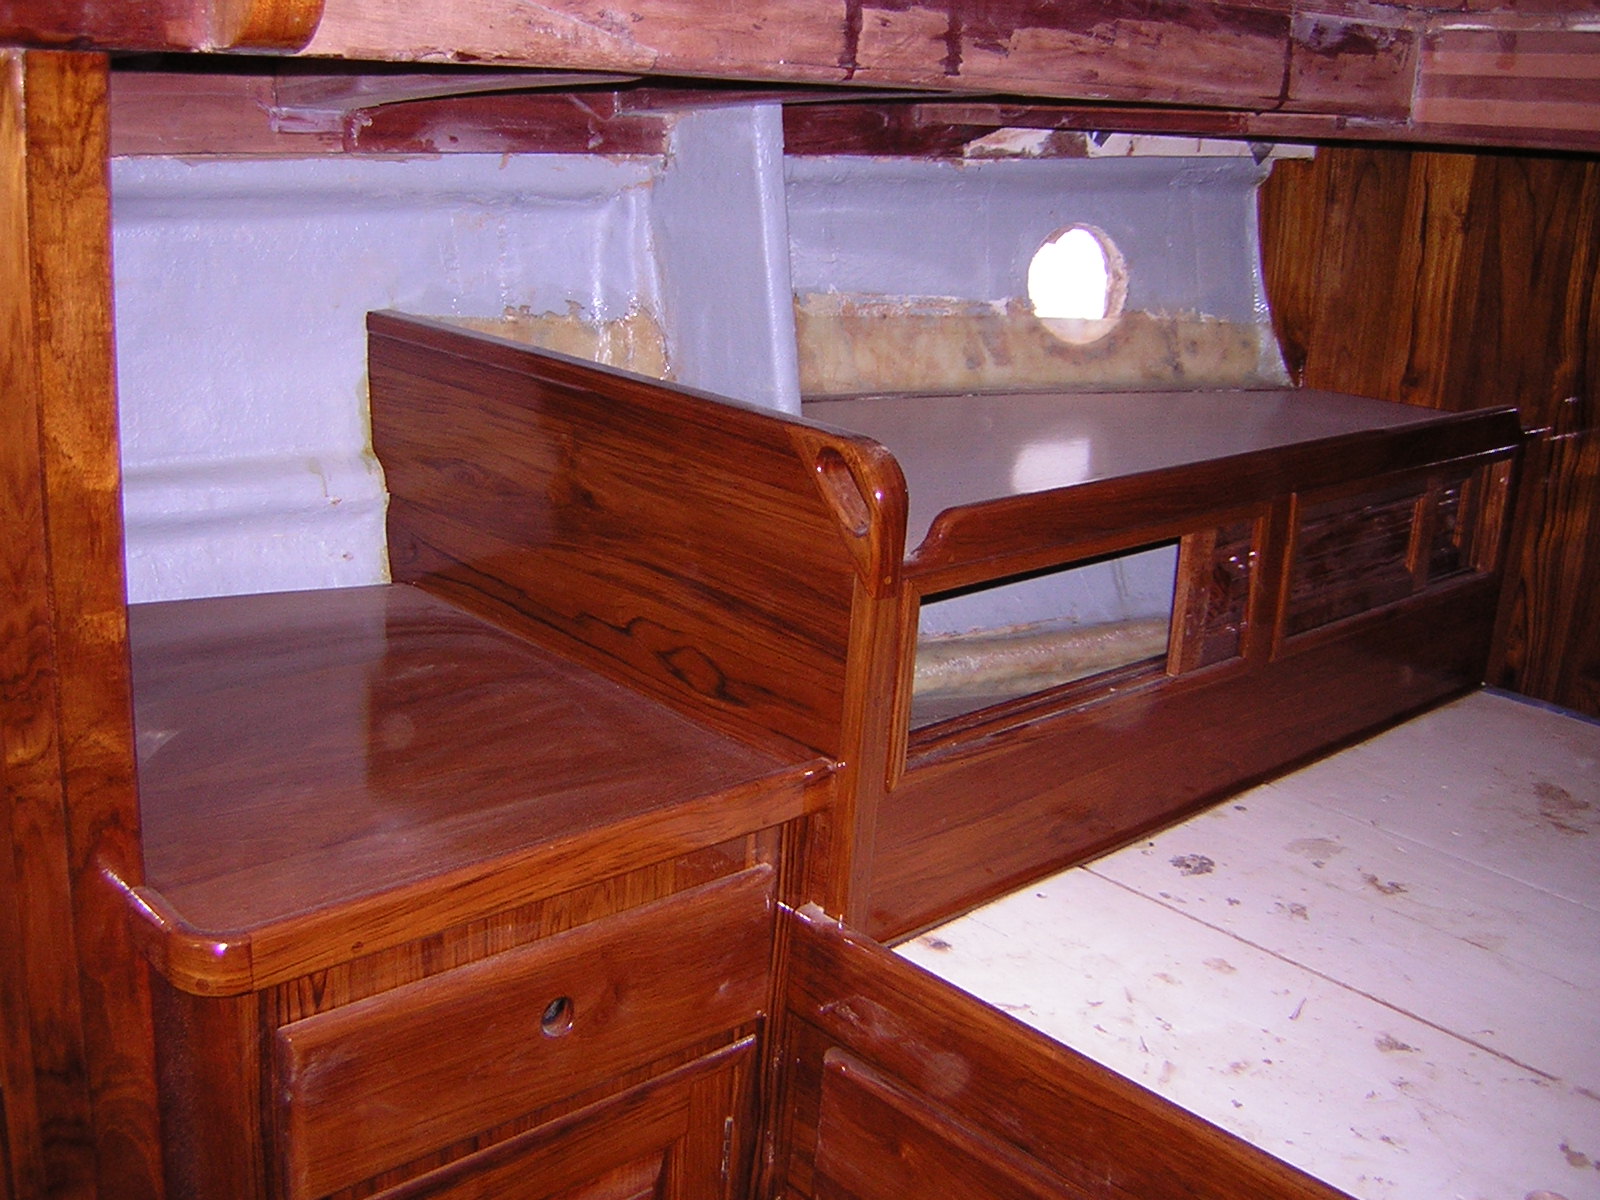 Aft Bunk Starboard, Varnished; May 16th, 2007